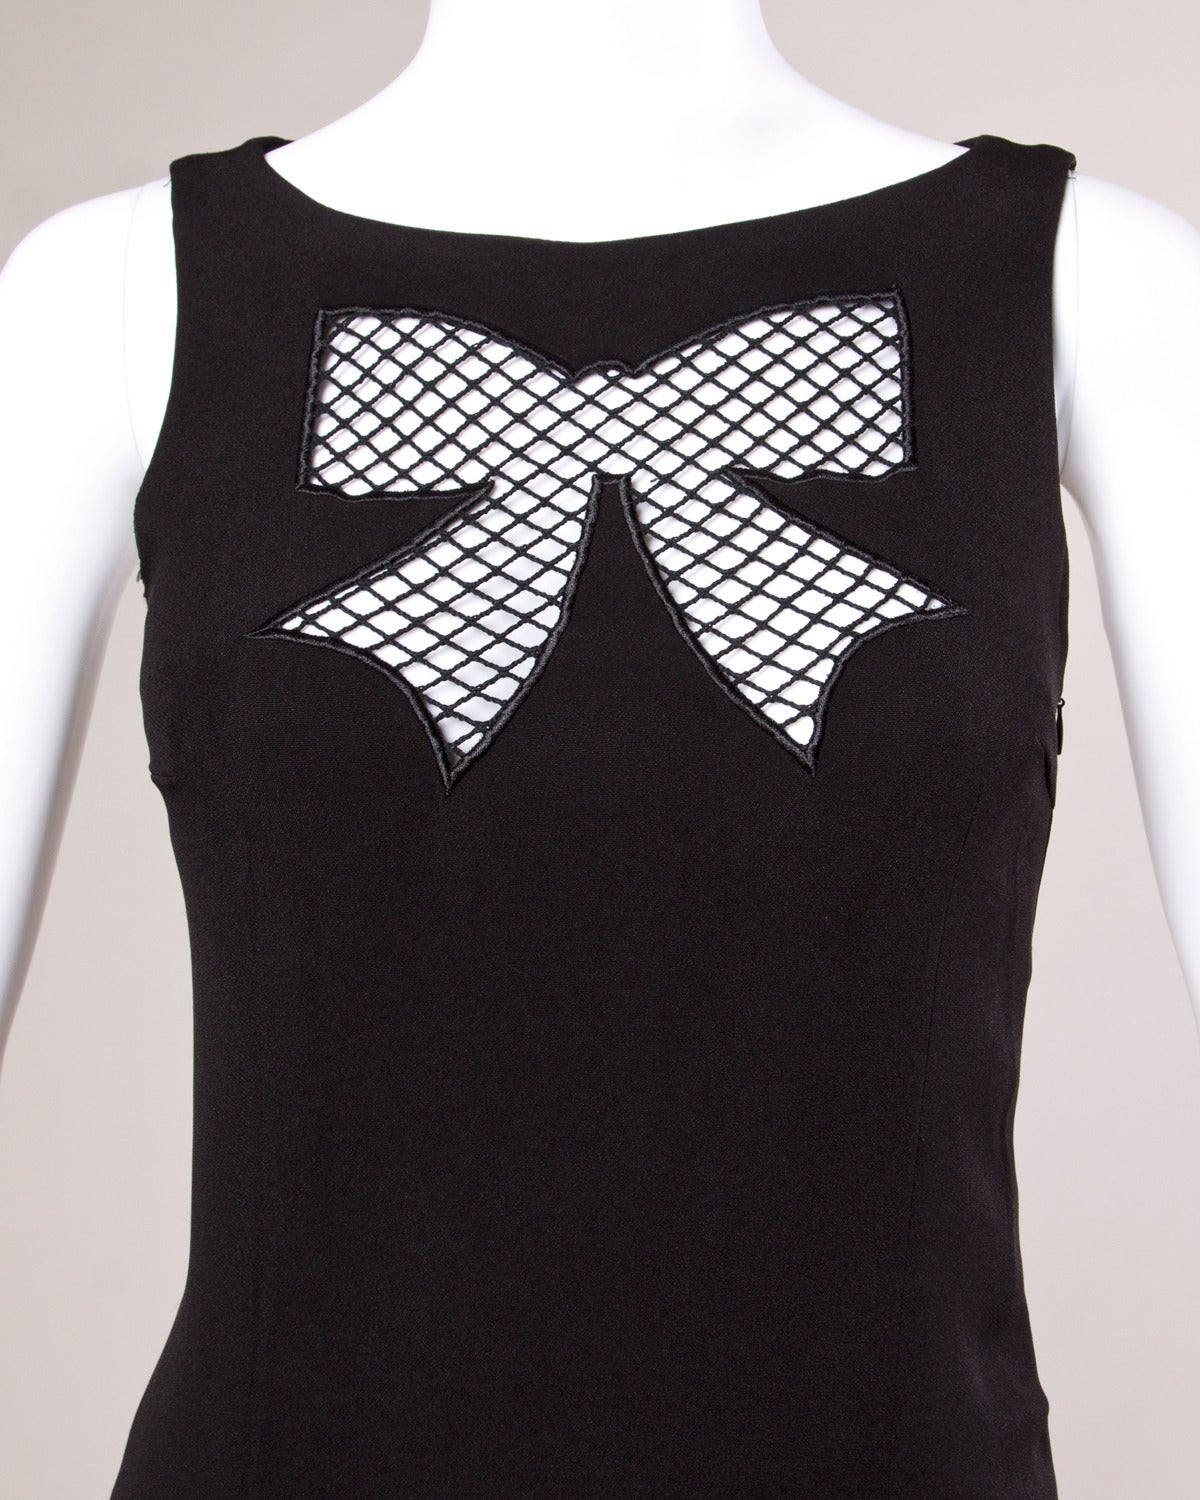 Darling vintage Moschino mini dress with a cut out bow tie detail. Sleeveless sleeves and mini length.

Details:

Unlined
Rear Zip Closure
Marked Size: Unmarked
Estimated Size: XS
Label: Cheap & Chic by Moschino

Measurements:

Bust: